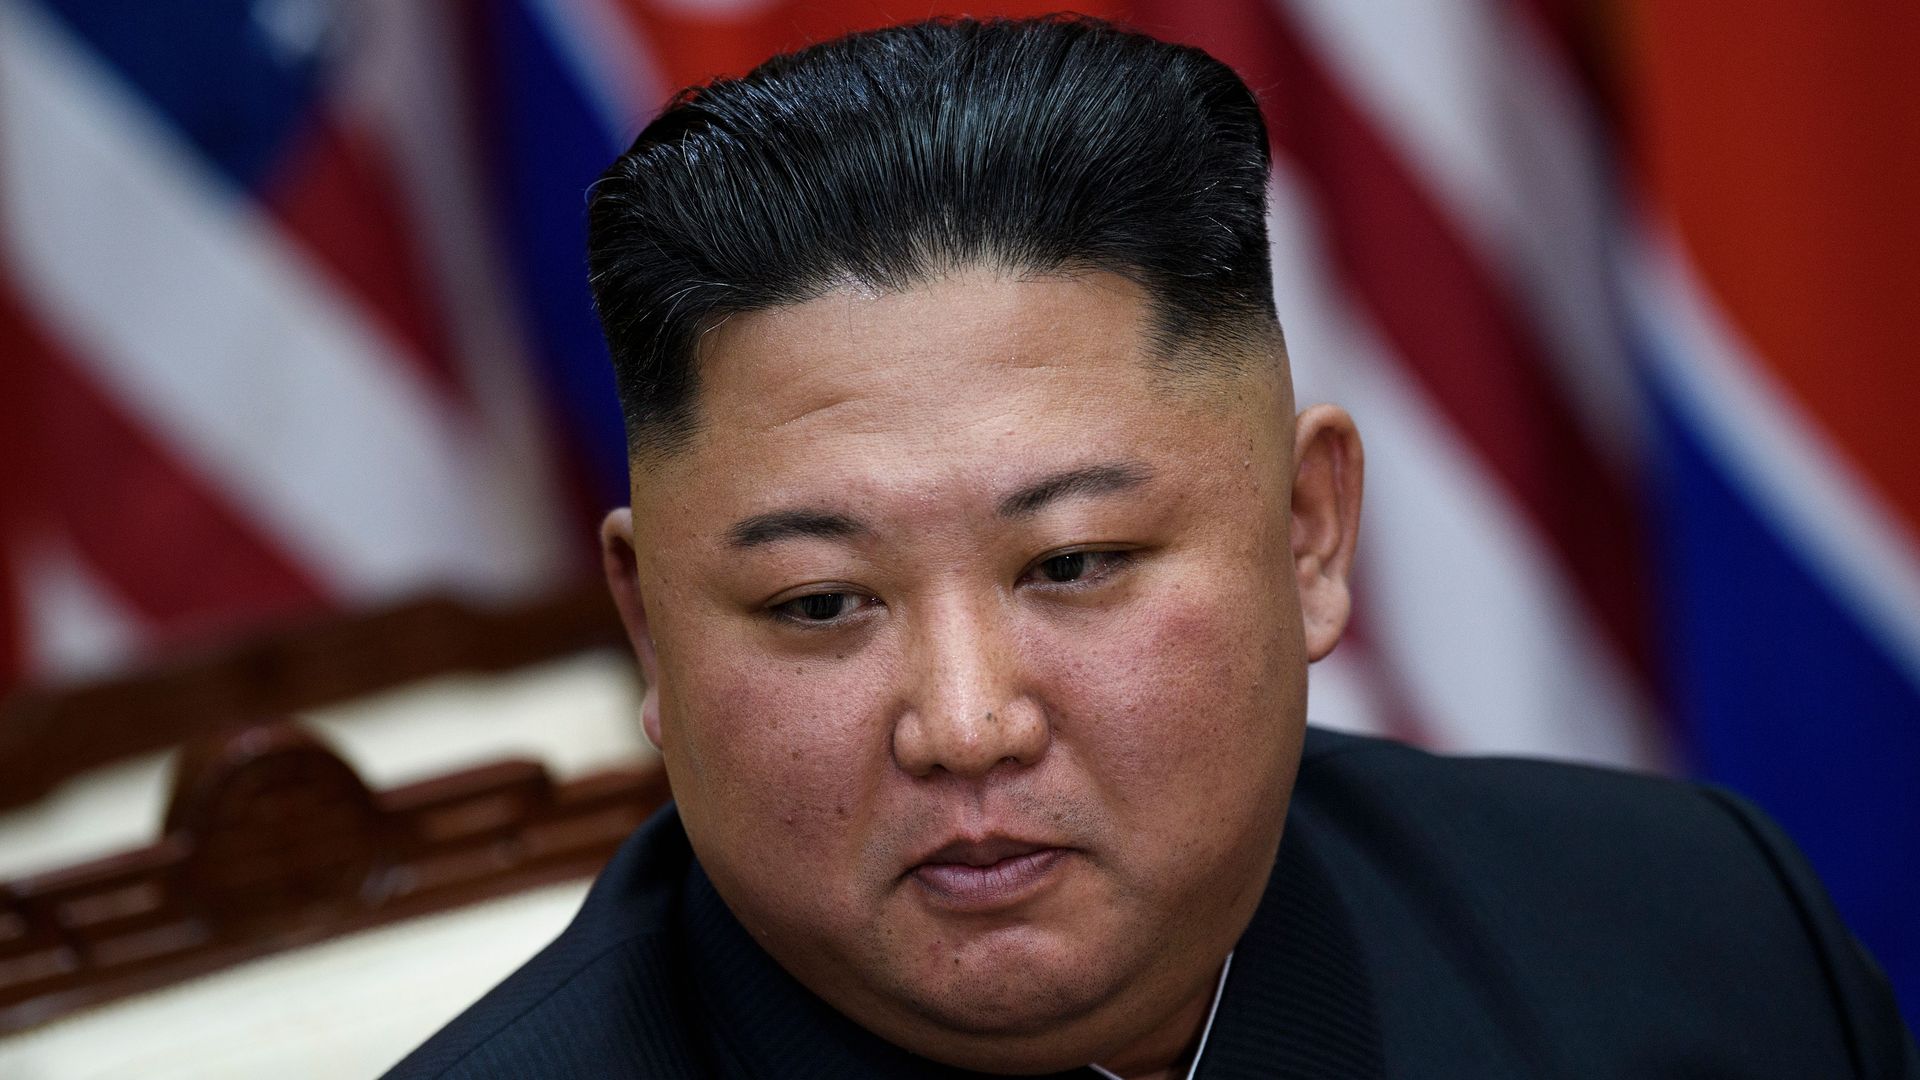 This image is a close-up of Kim Jong Un. 